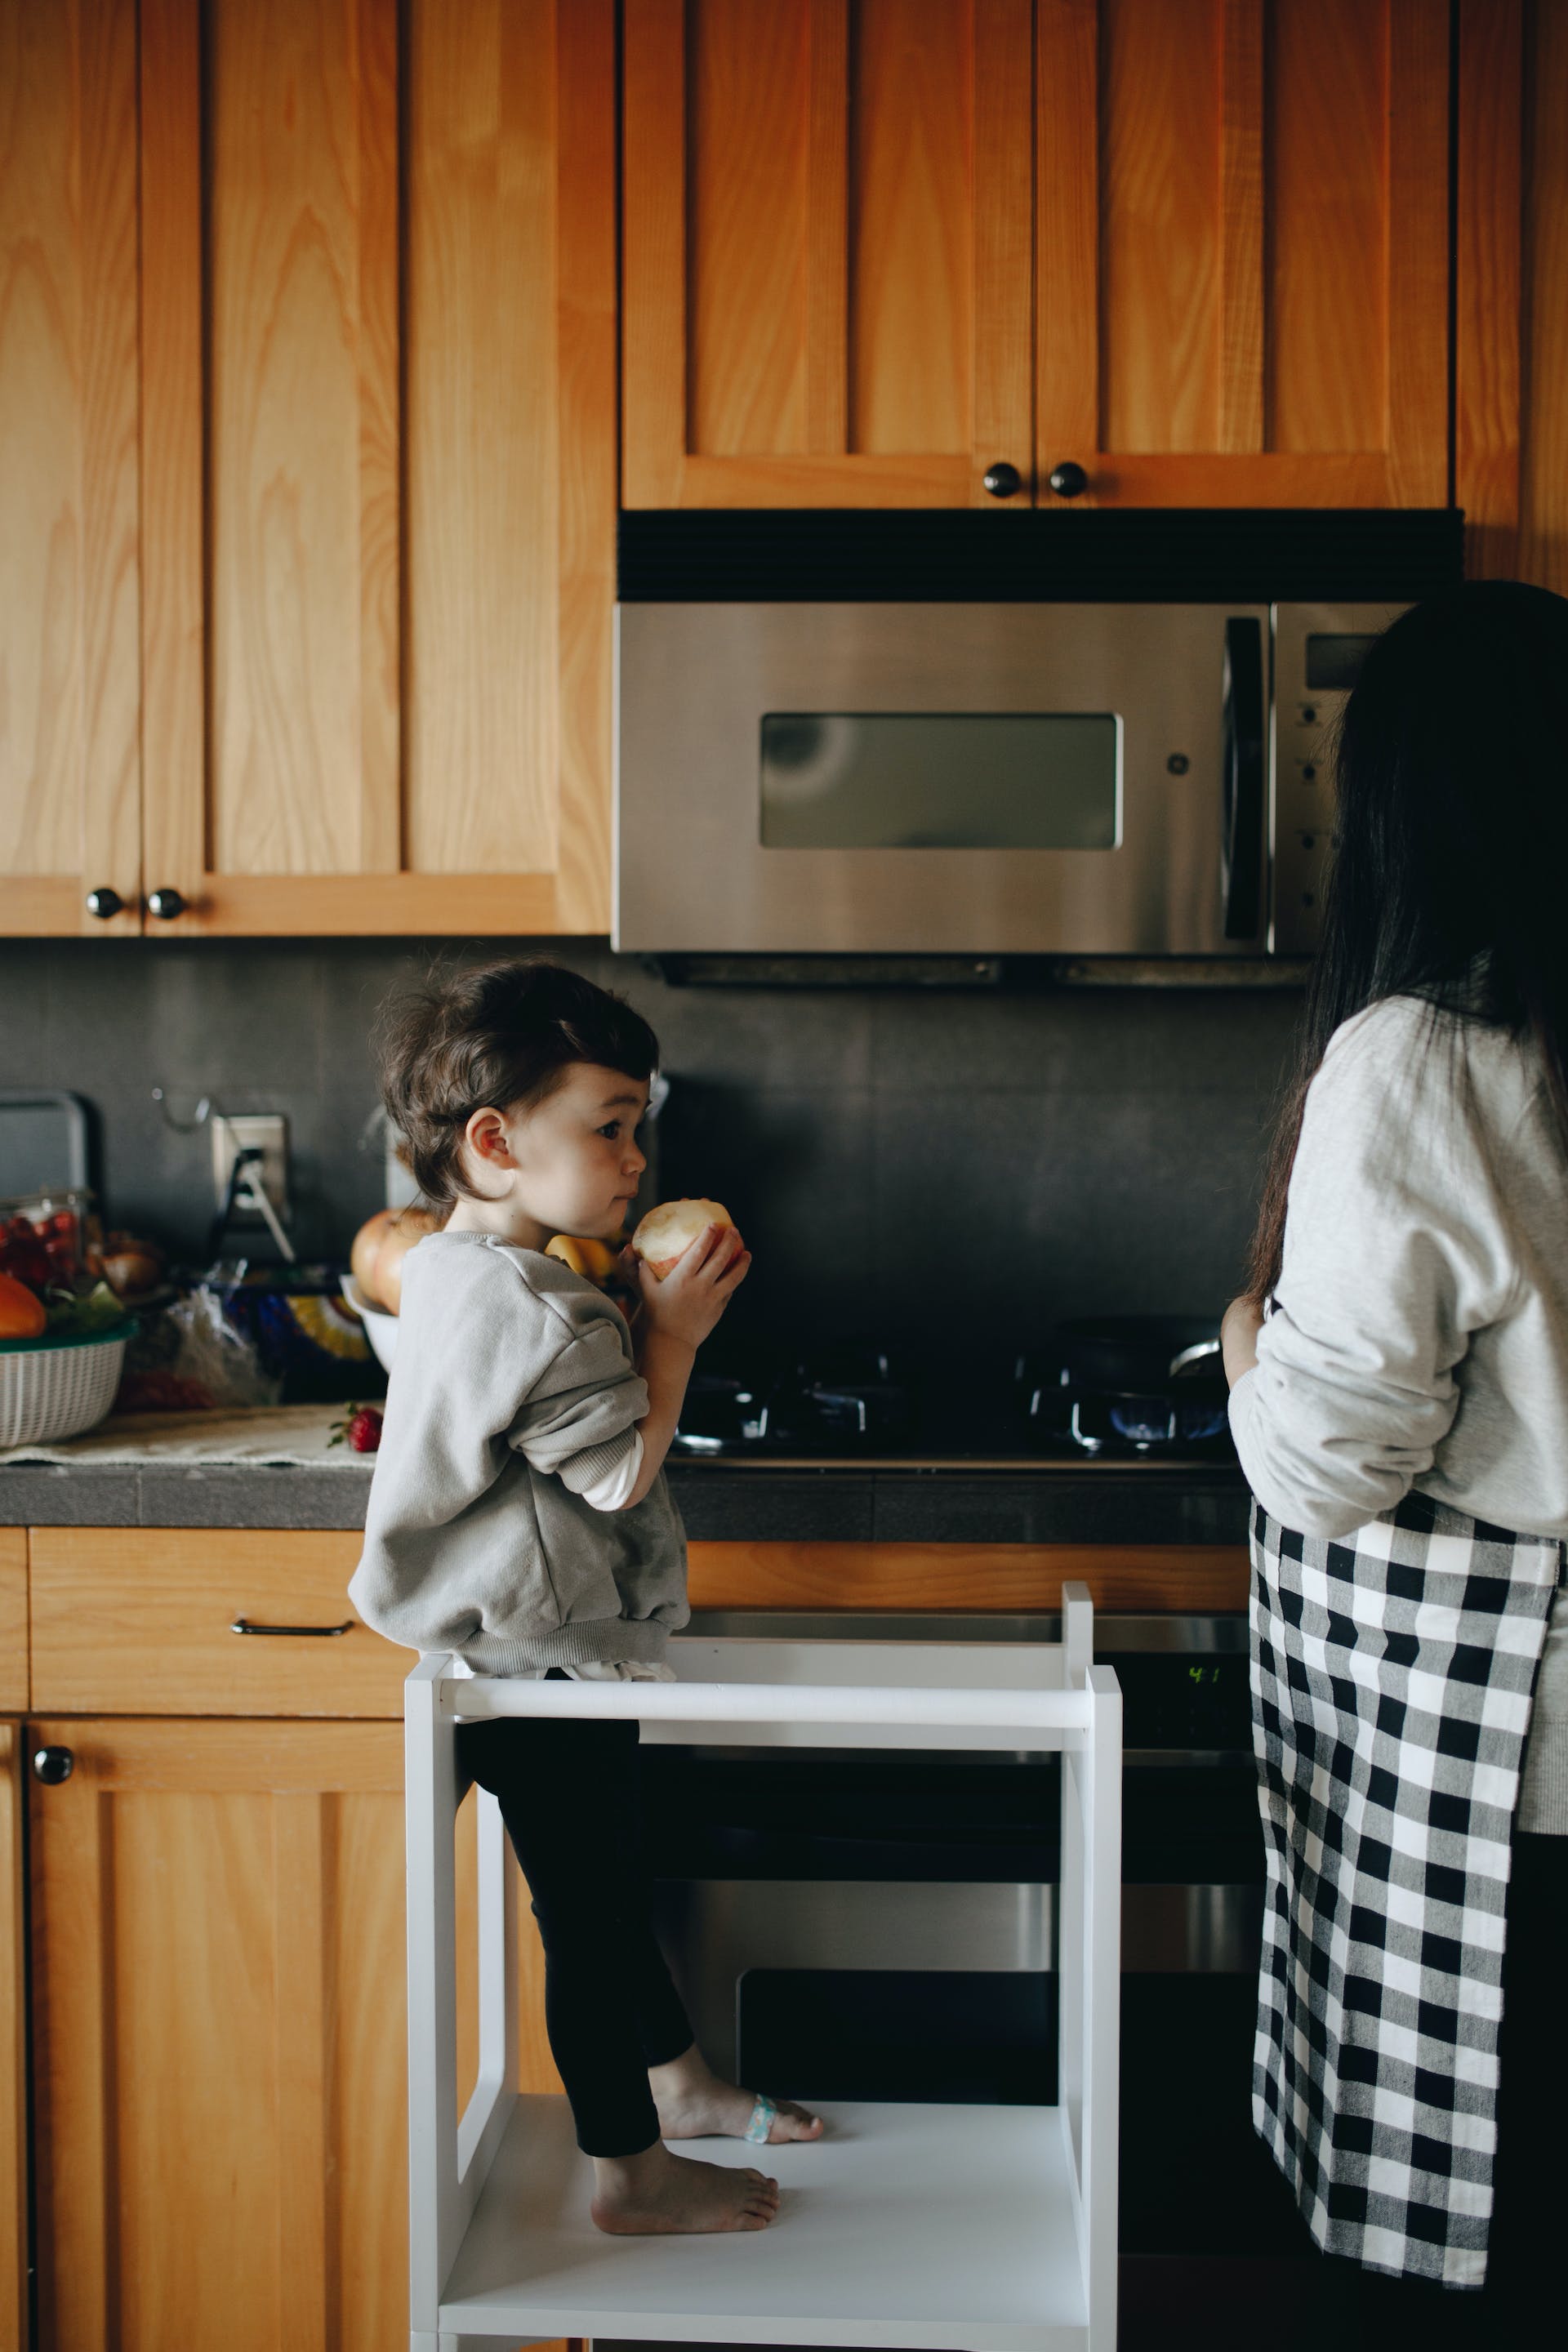 A little boy standing beside his mom in the kitchen | Source: Pexels